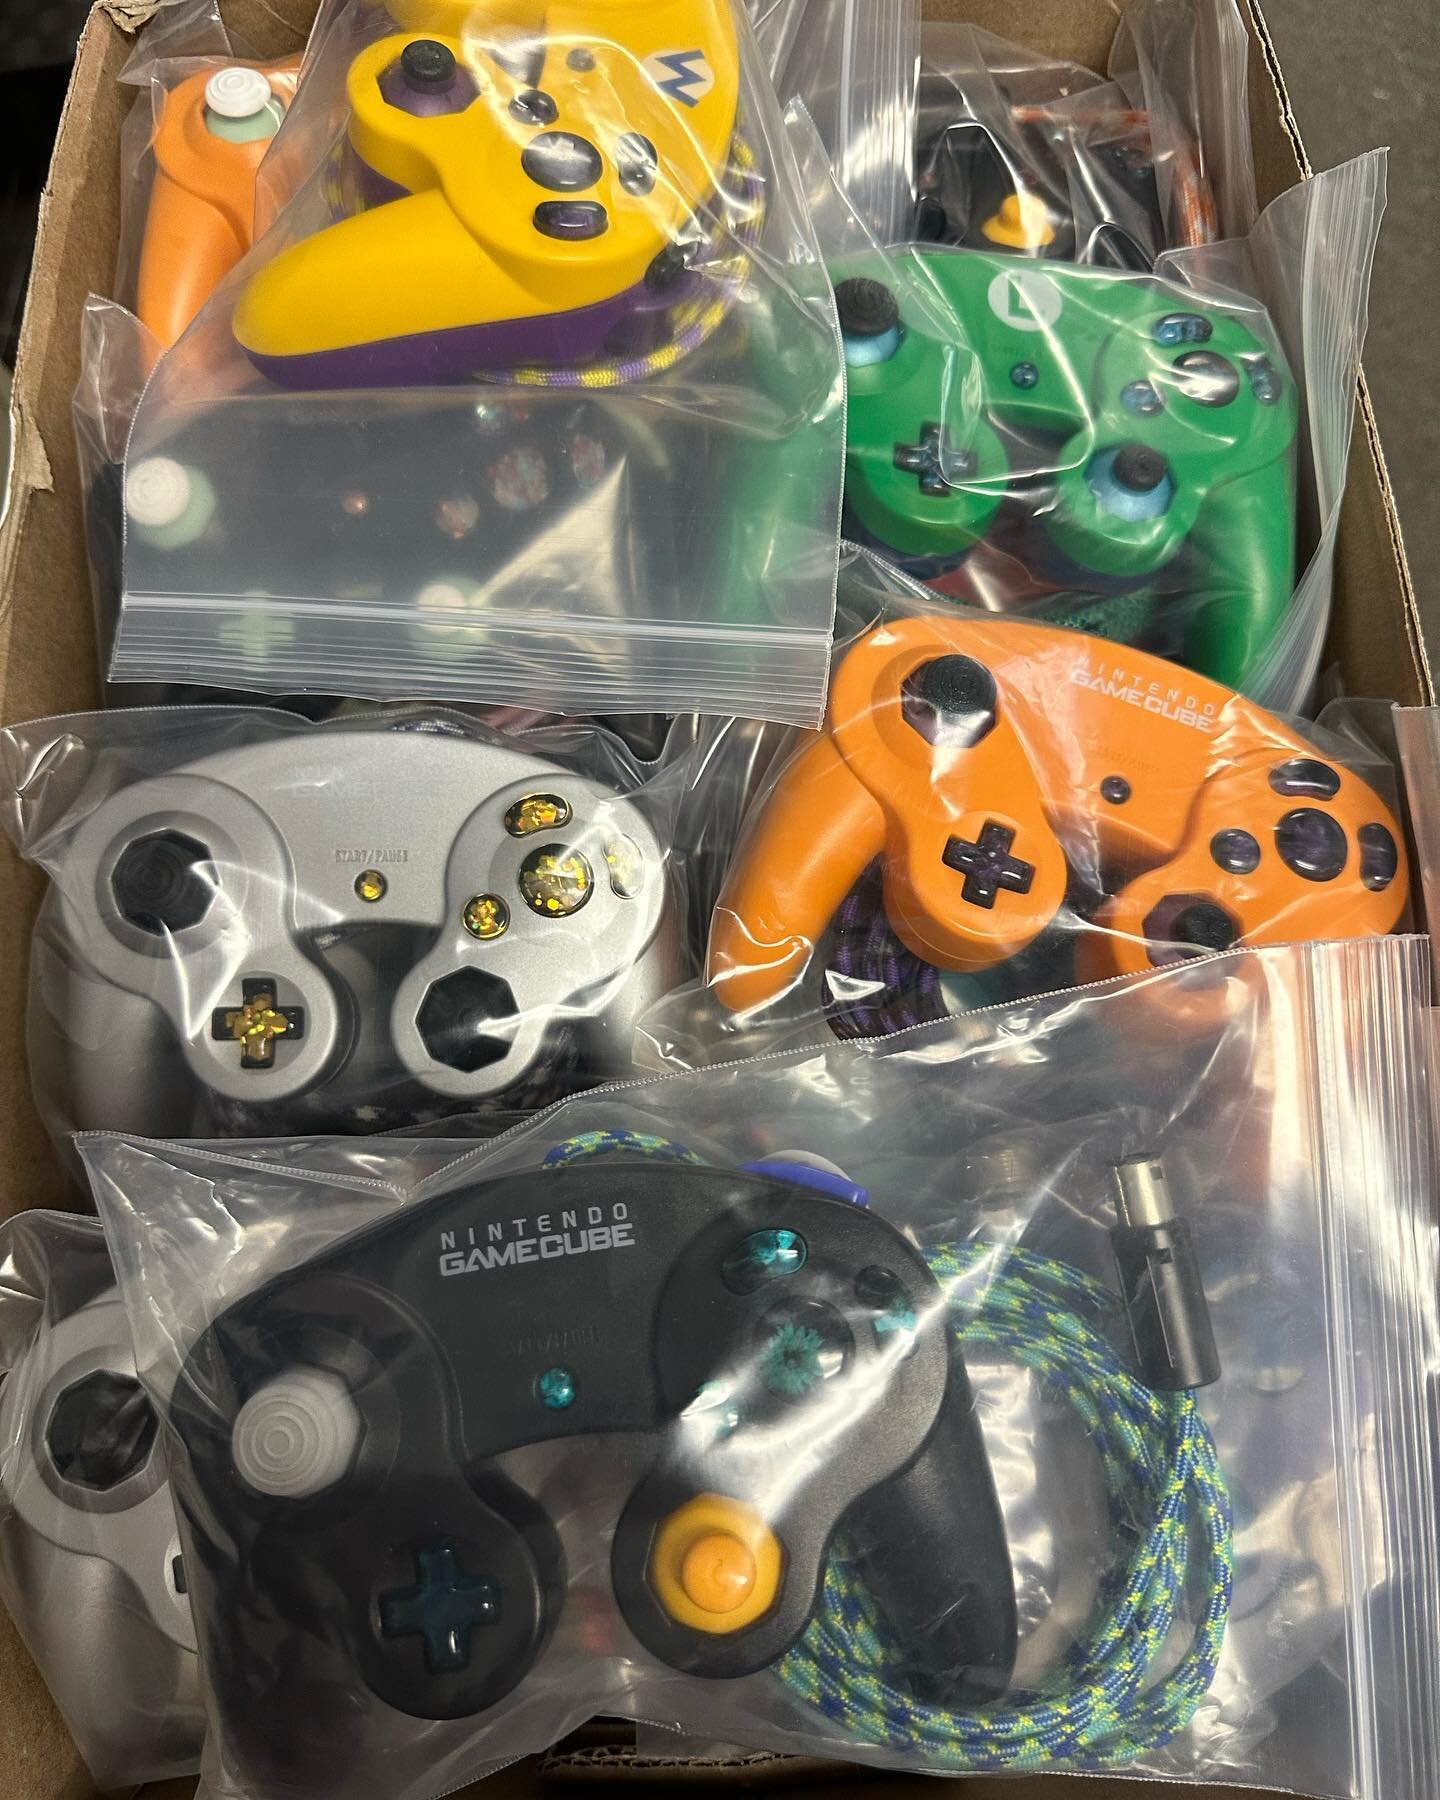 I&rsquo;ve got some left over prebuilts from the tourney, including Club Nintendo controllers, a couple JP Whites, Emeralds, other colors with T3s, and a few T2 budget builds, all with no-reset SnapBack modules, I&rsquo;ll post a few more pictures so